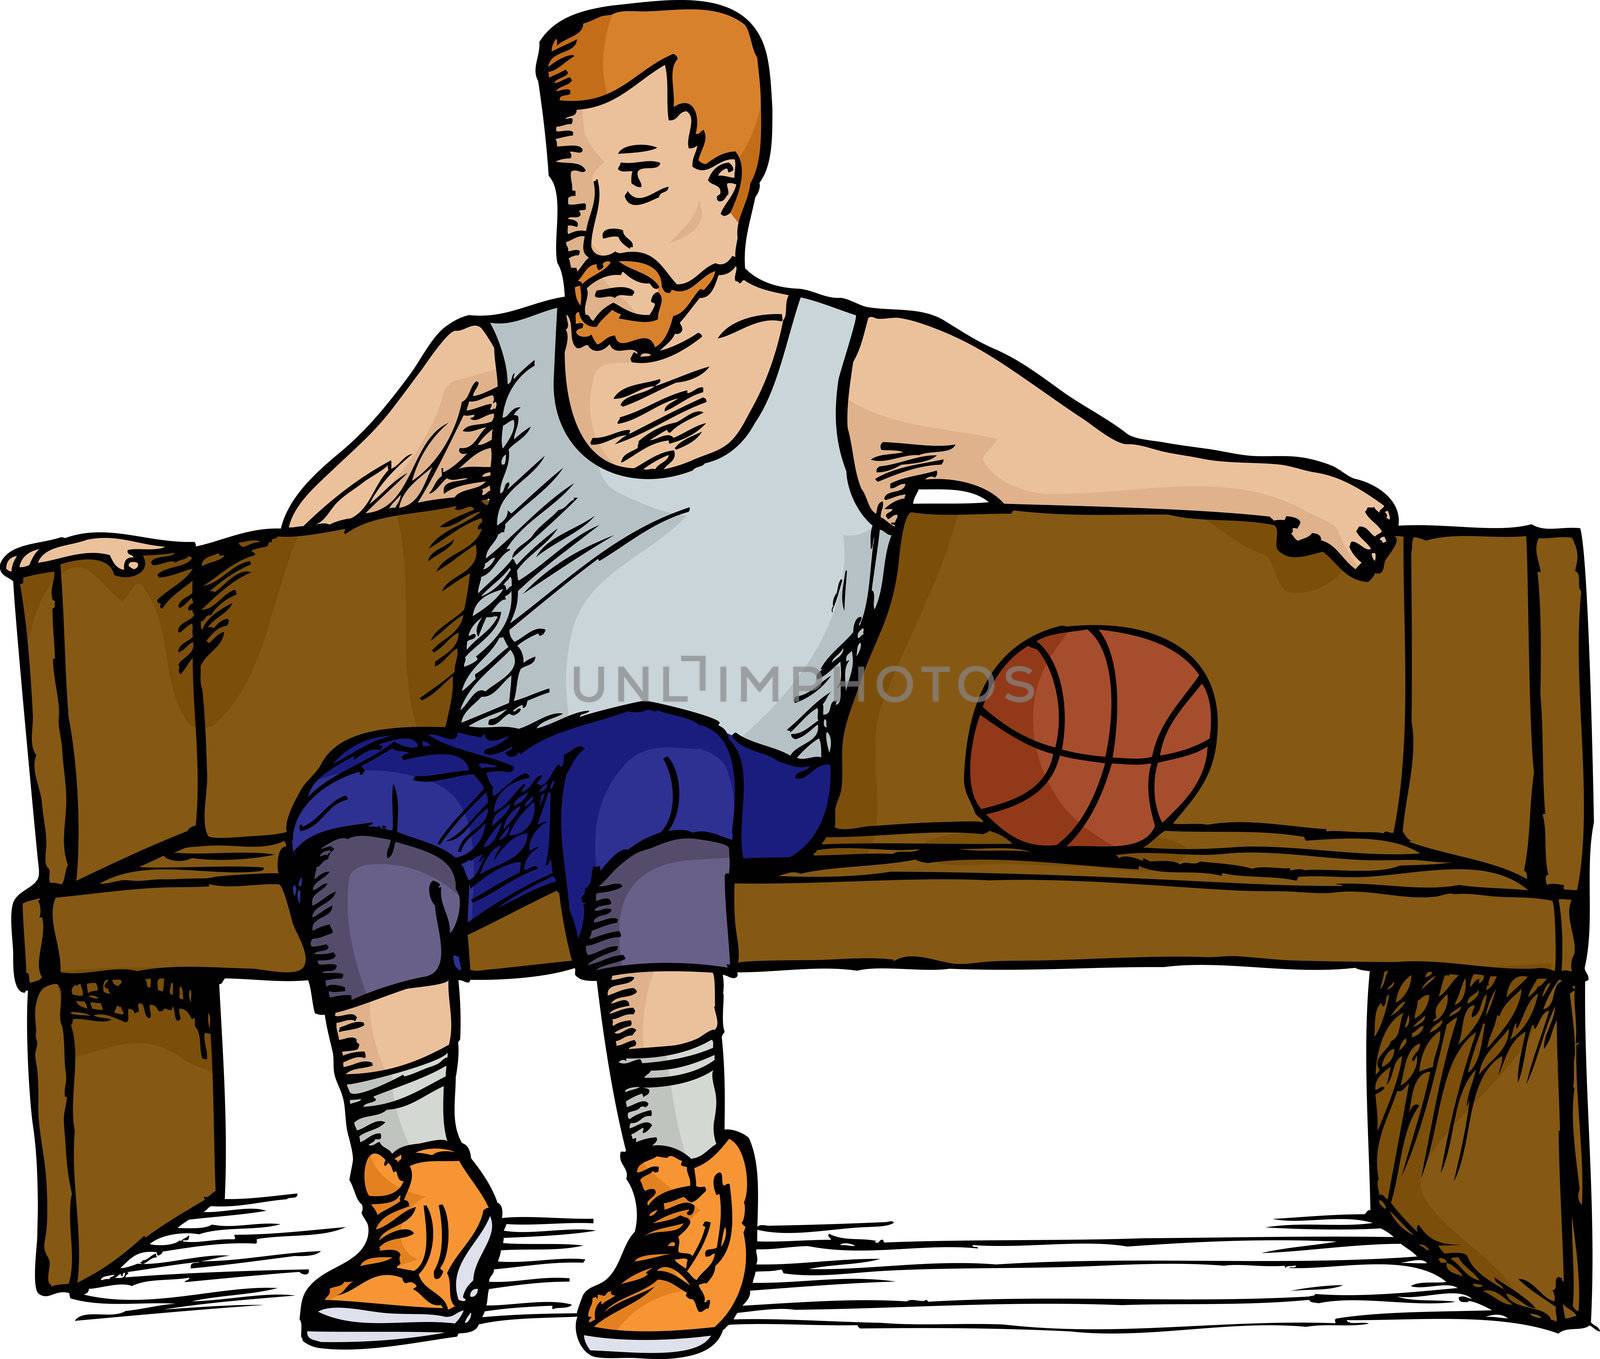 Mature heavyset basketball player sitting on bench over white background